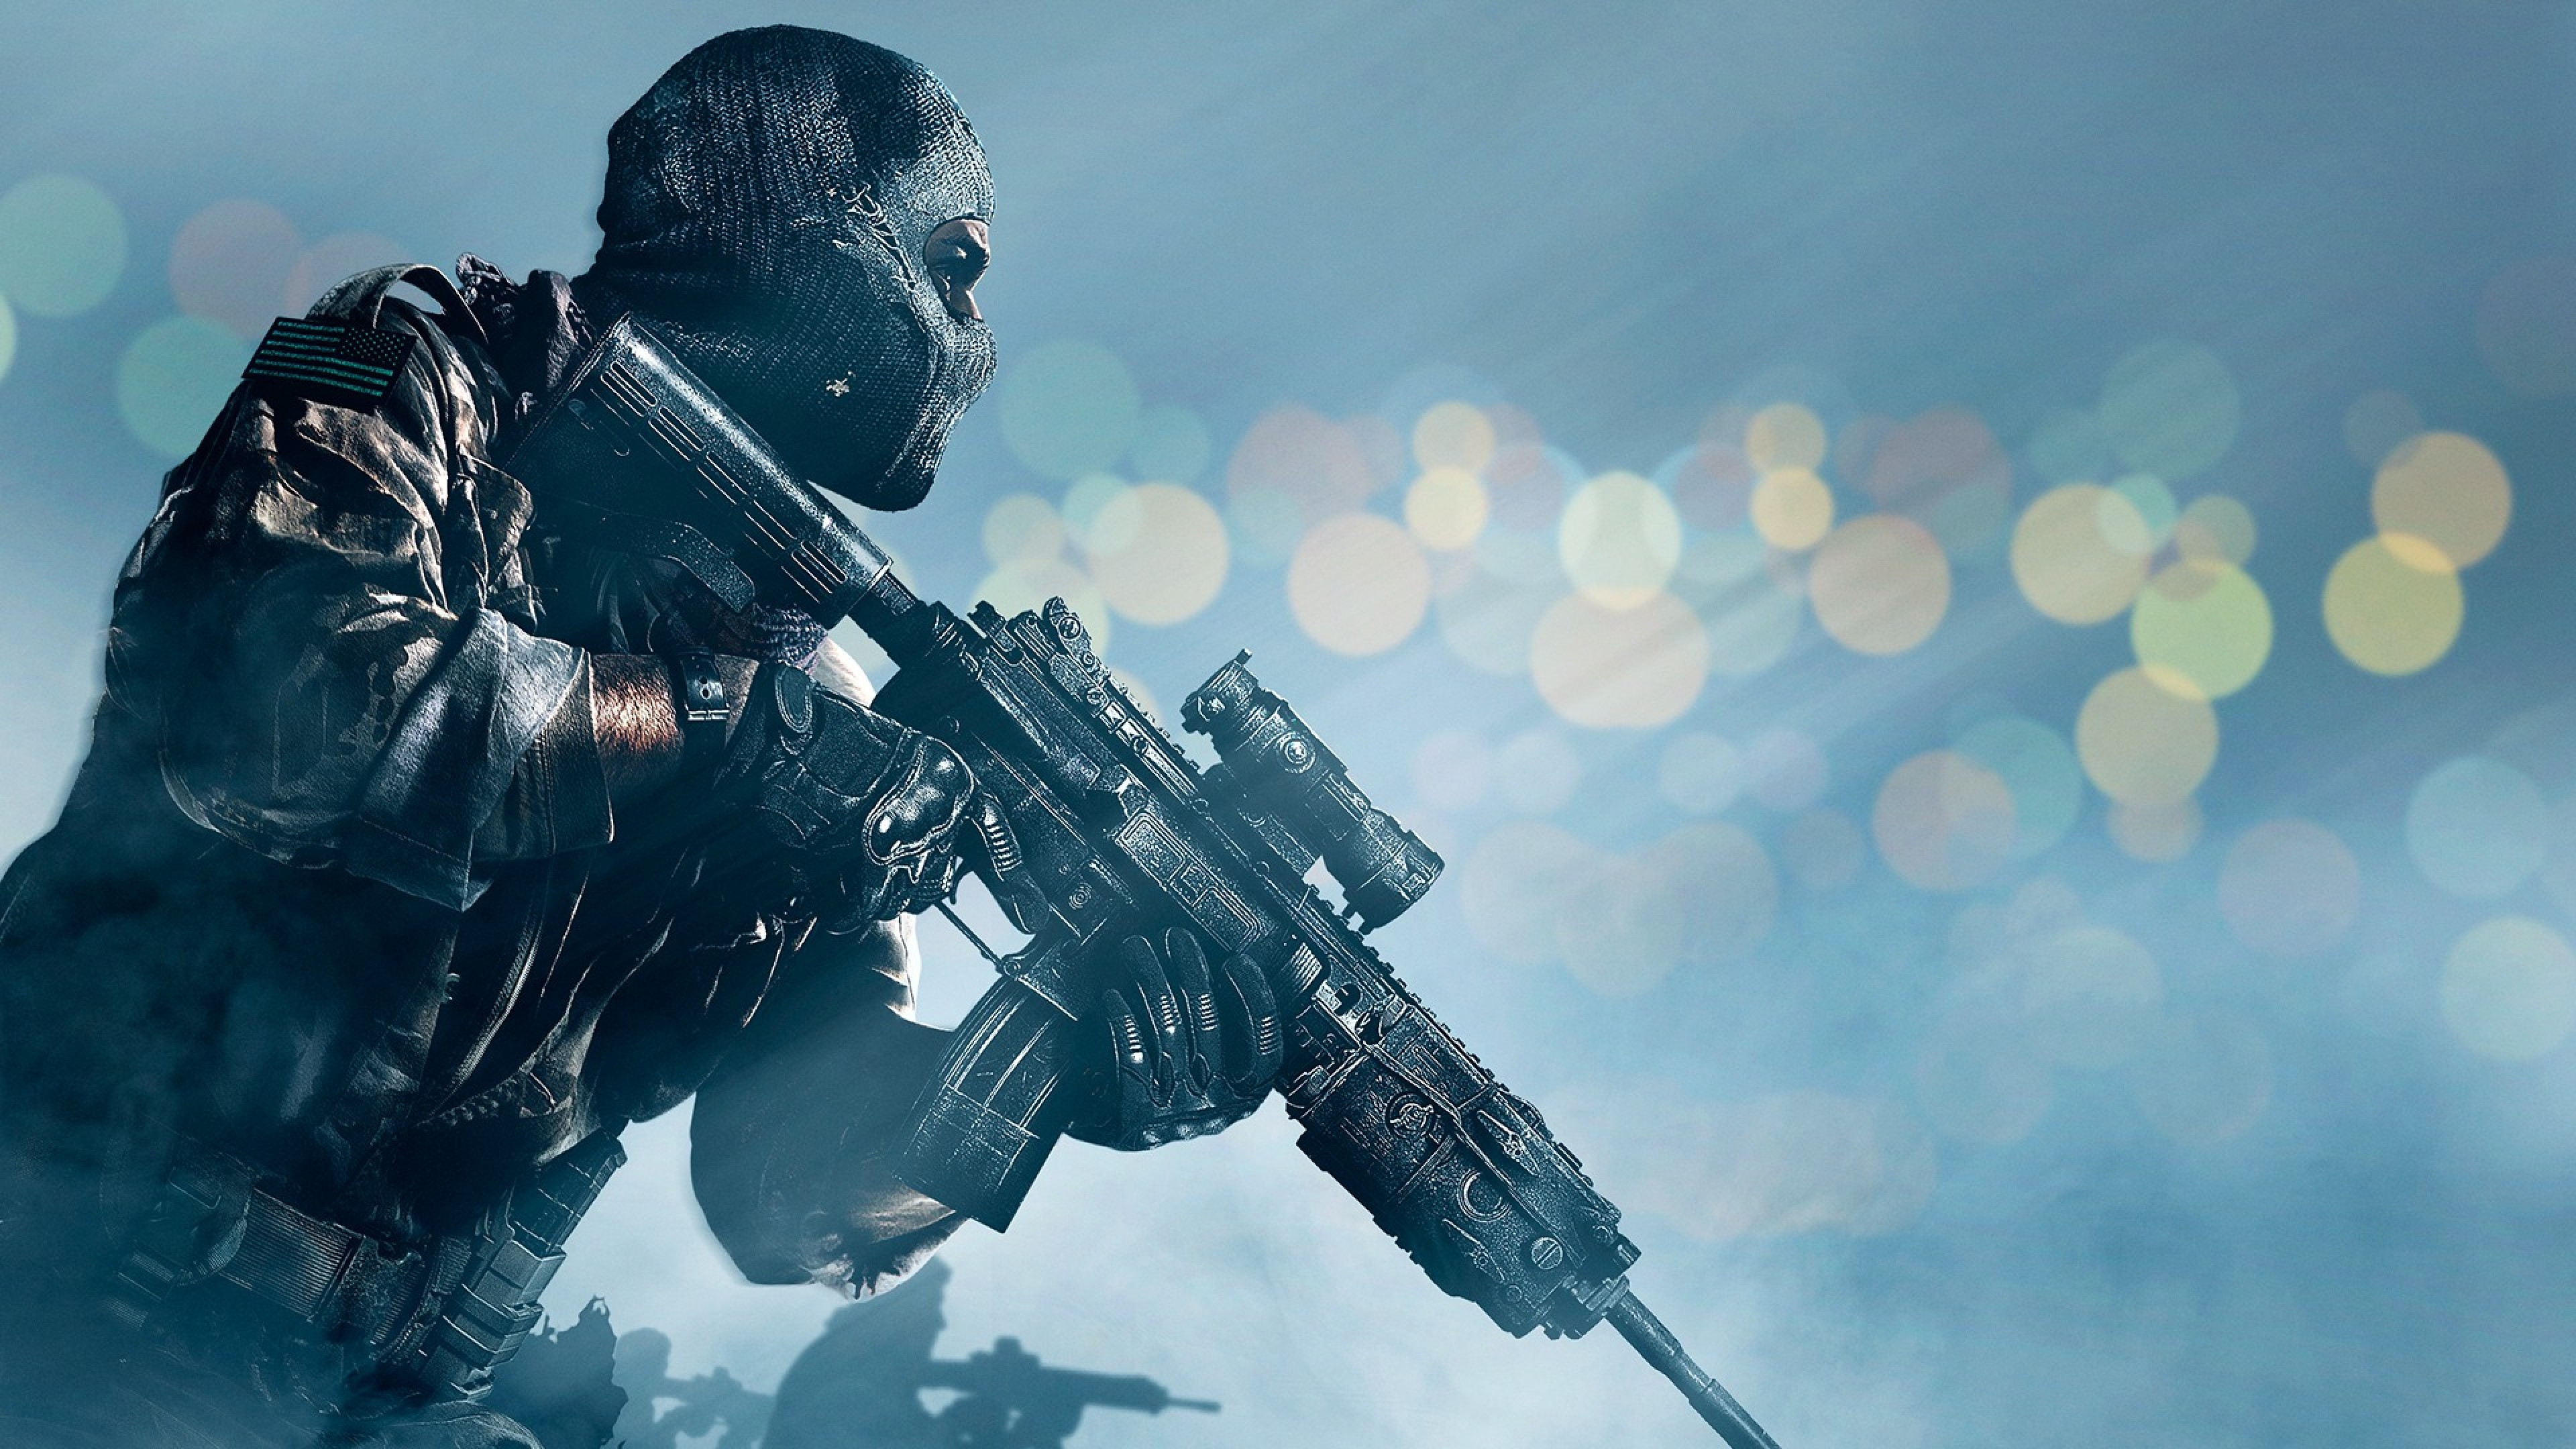 3840x2160  Wallpaper call of duty ghosts, activision, infinity ward,  soldier, gun,